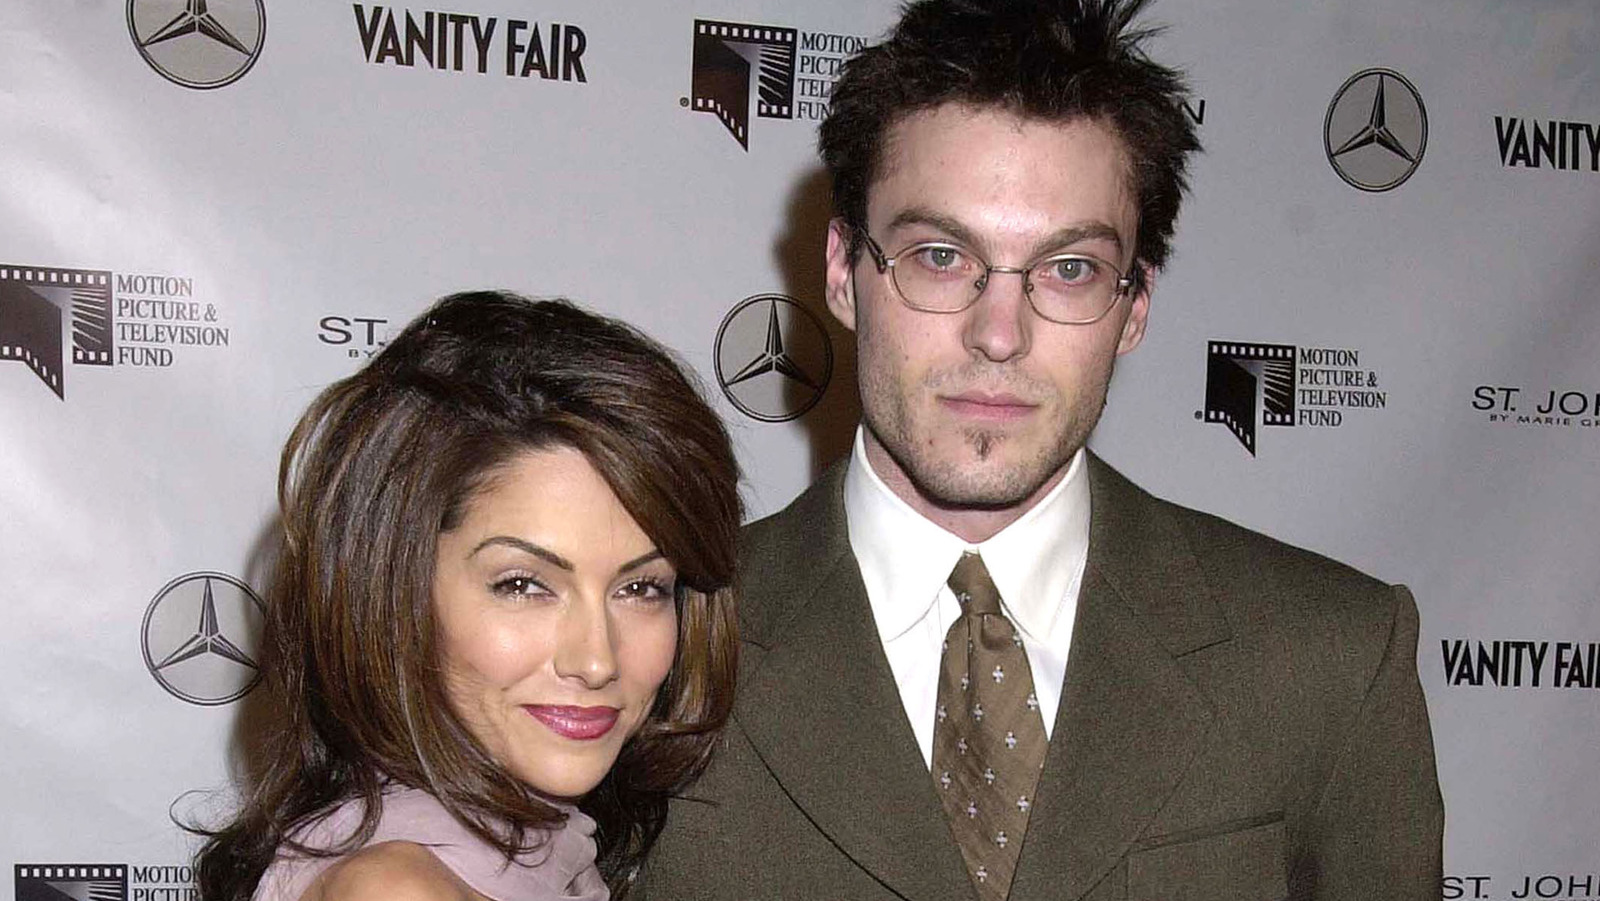 Brian Austin Green And Vanessa Marcil's Son Kassius Is All Grown Up